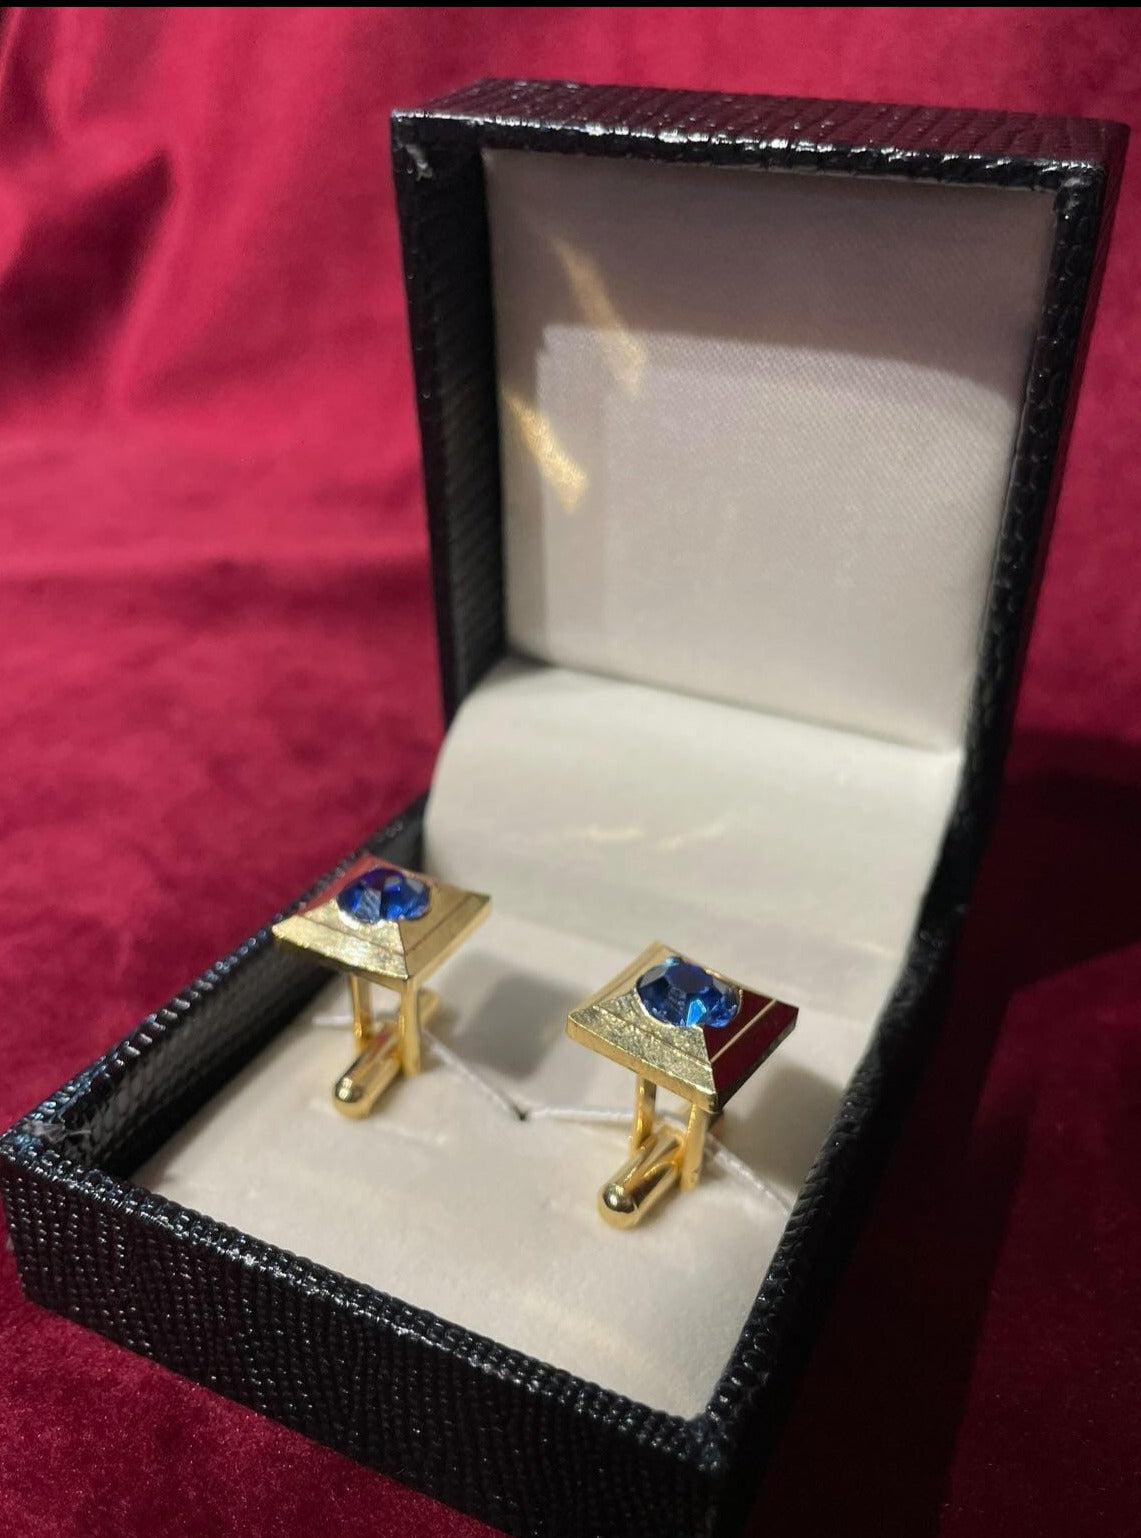 Golden Square Cufflink With Blue Stone